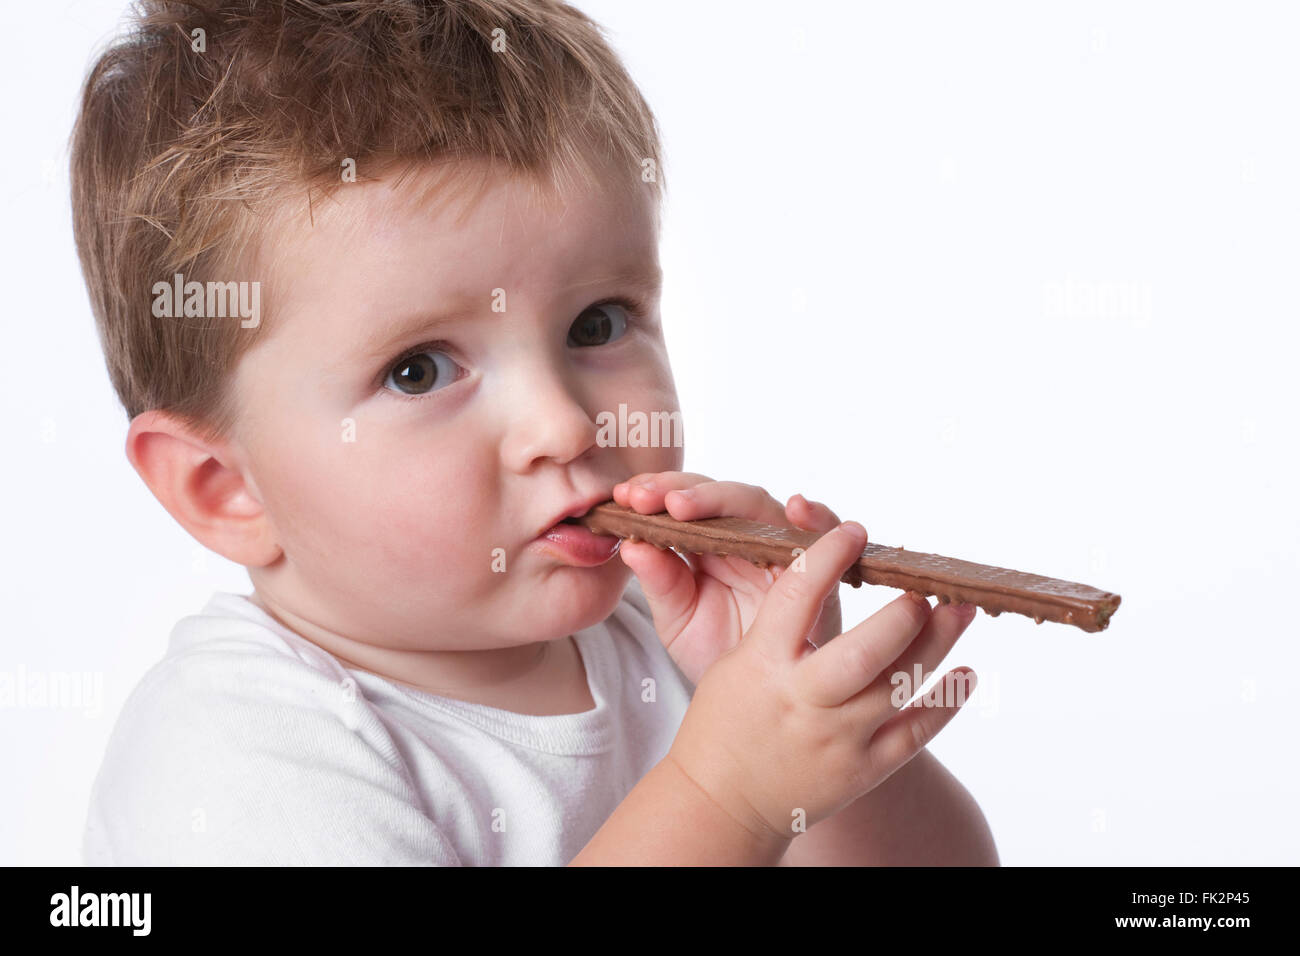 Toddler boy is eating a chocolate snack on white background Stock Photo